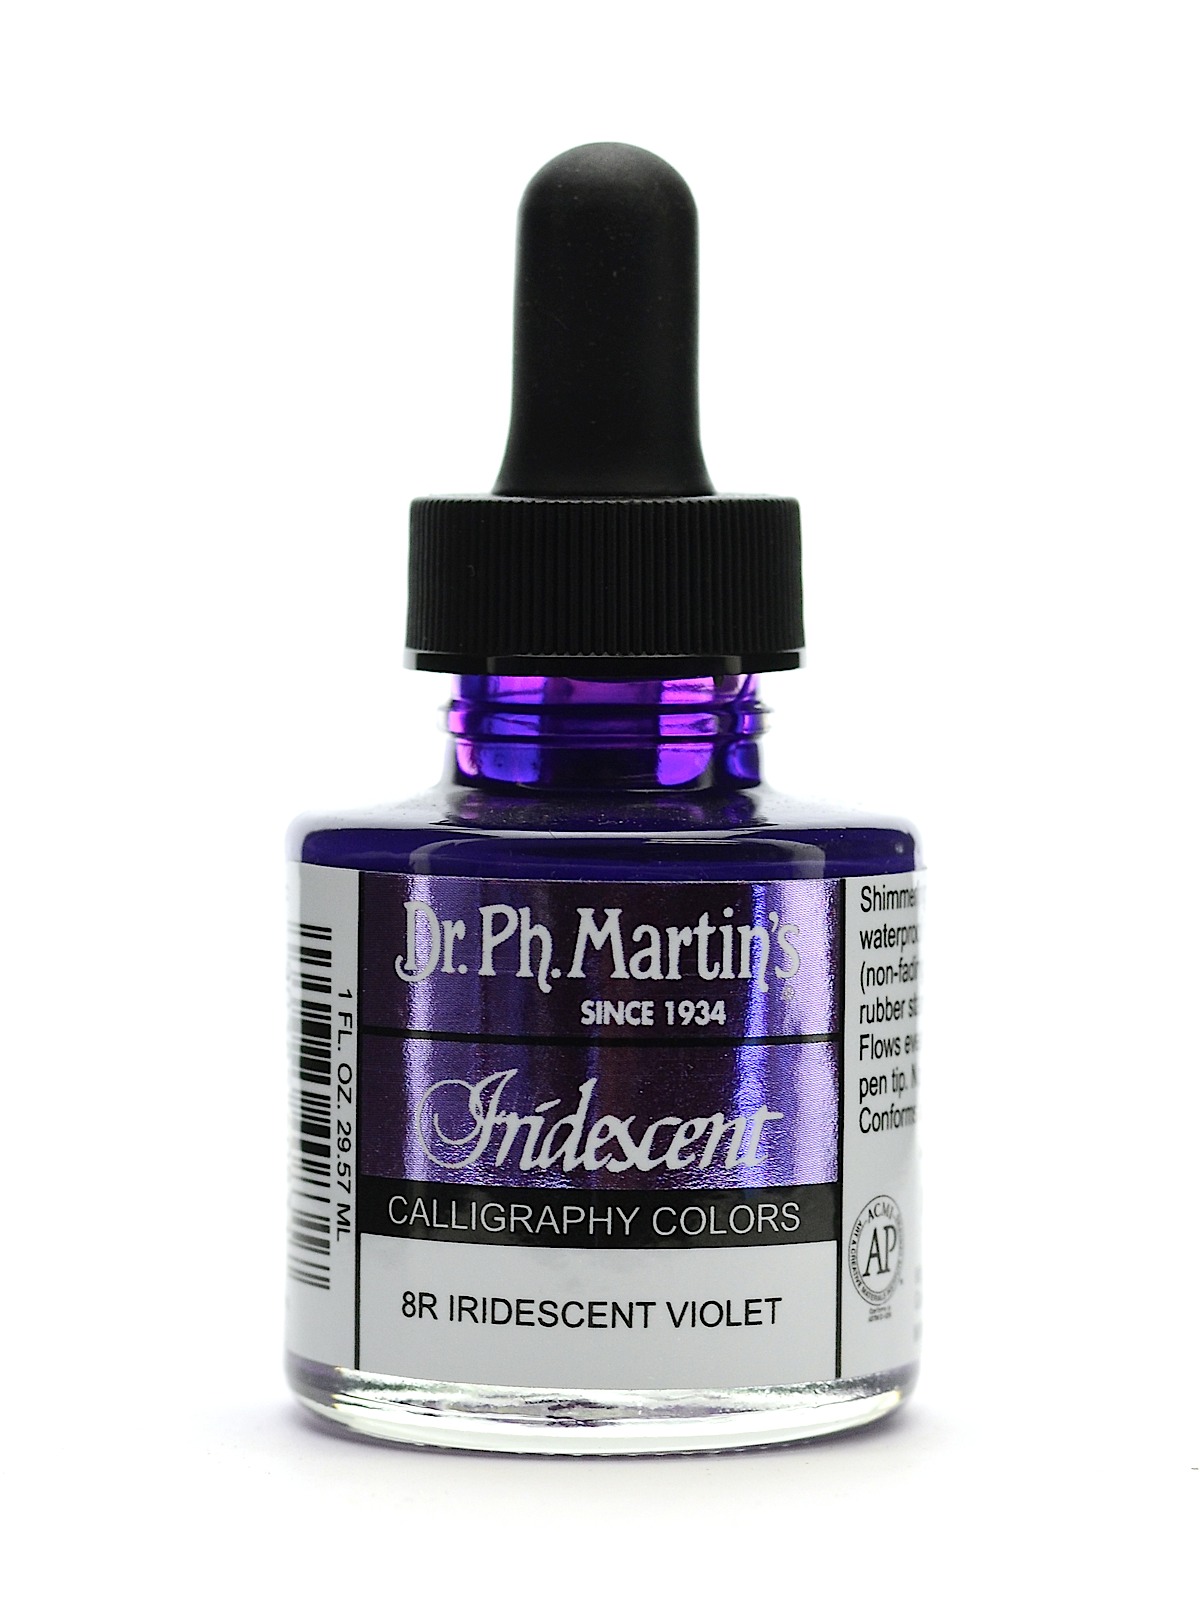 Iridescent Calligraphy Colors 1 Oz. Violet